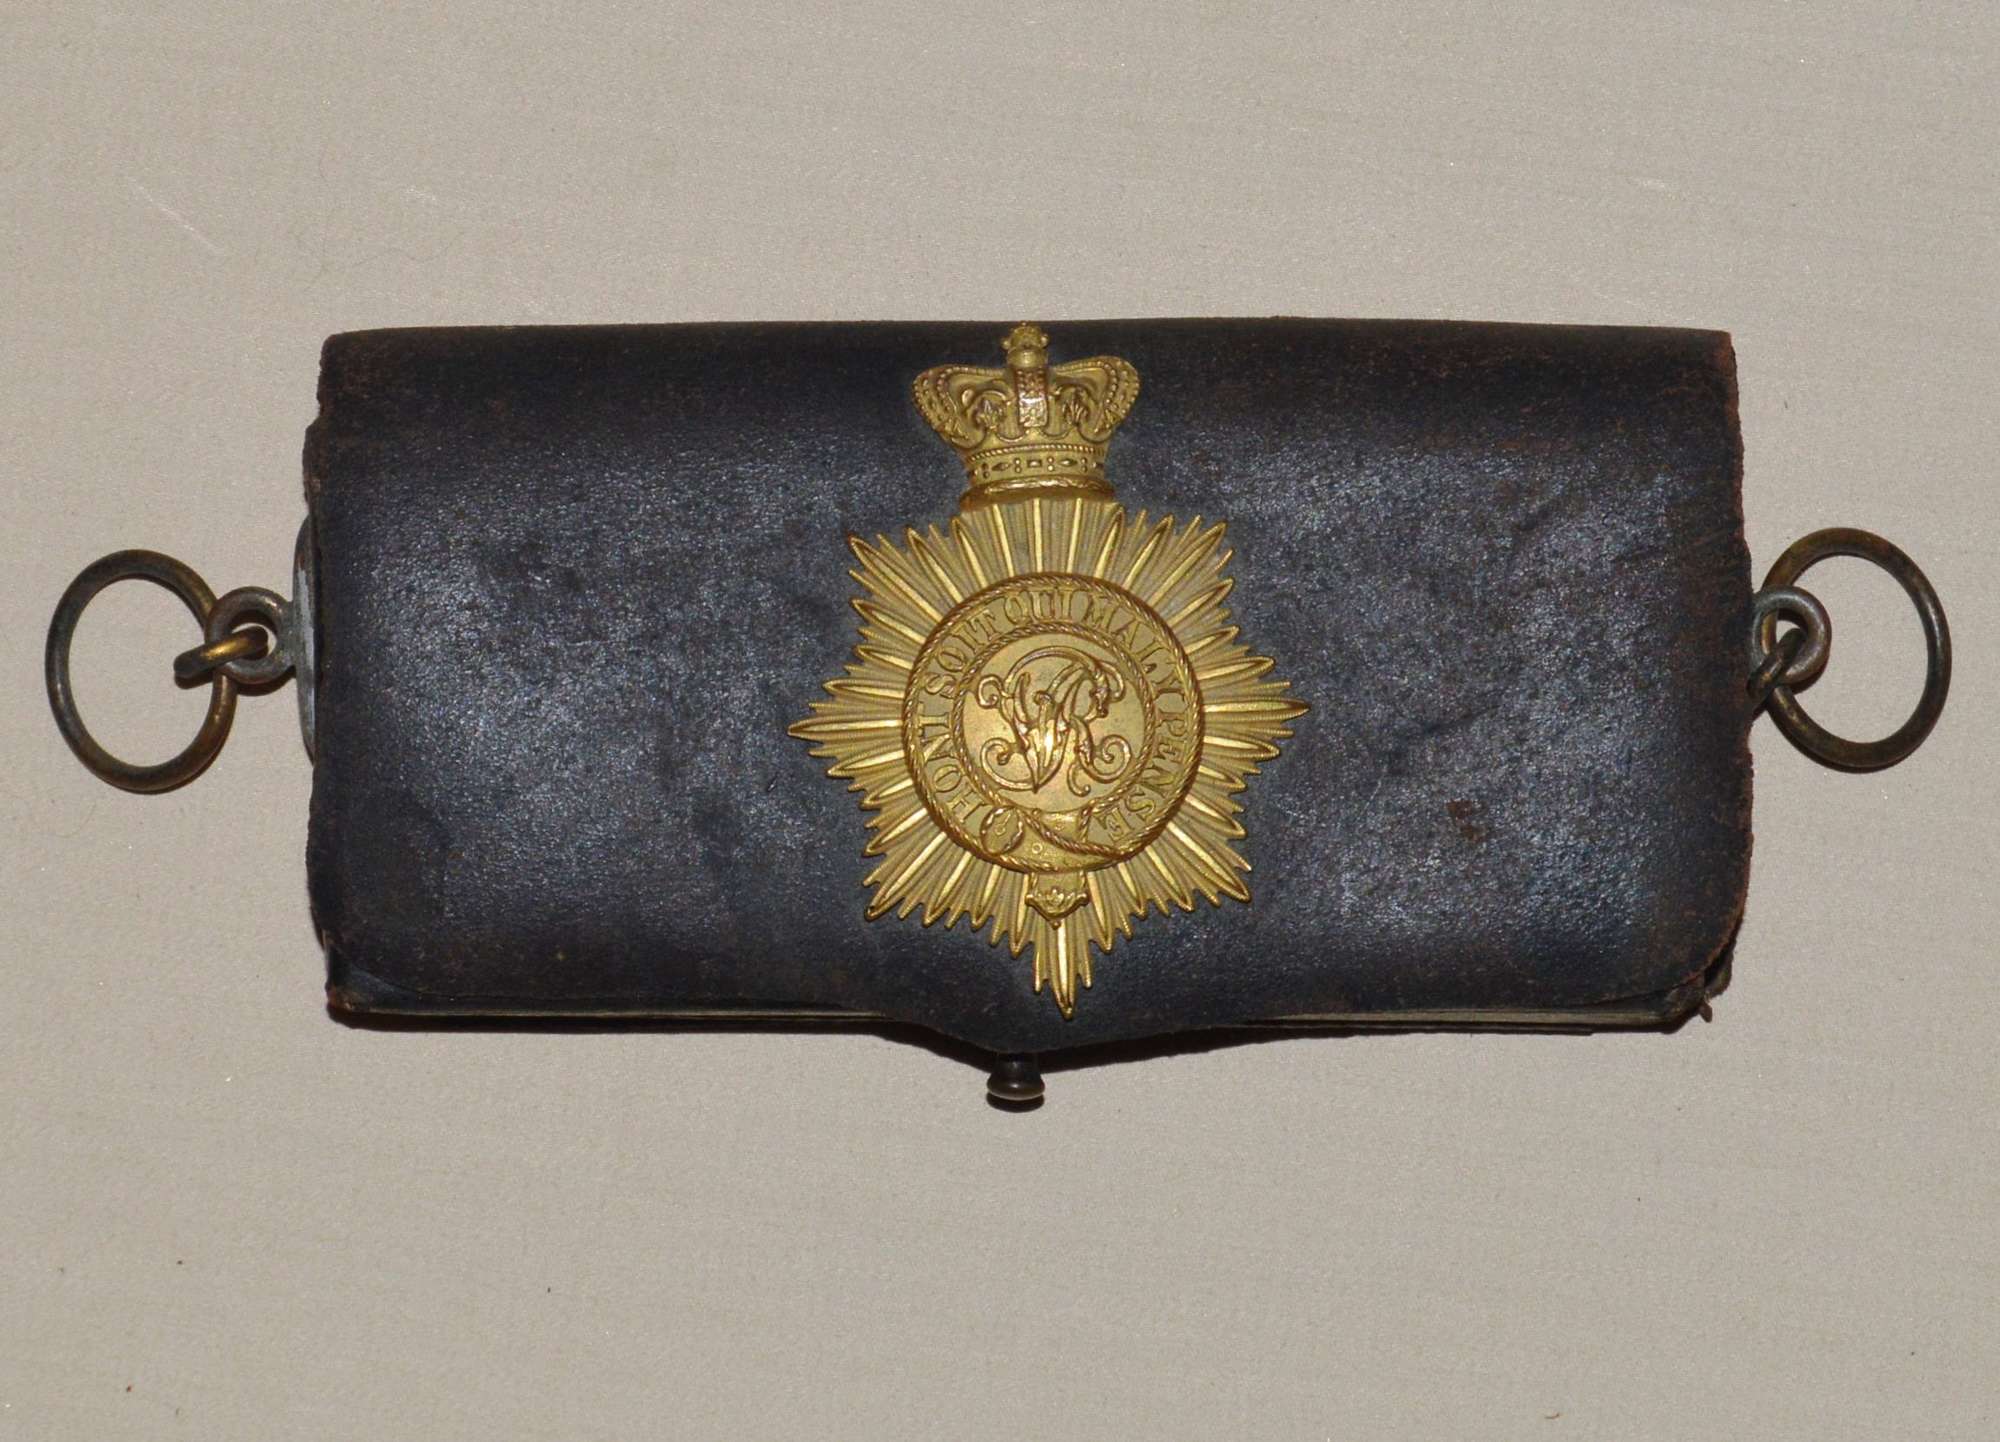 ﻿Rare British Victorian Order of the Garter Officer’s Pouch